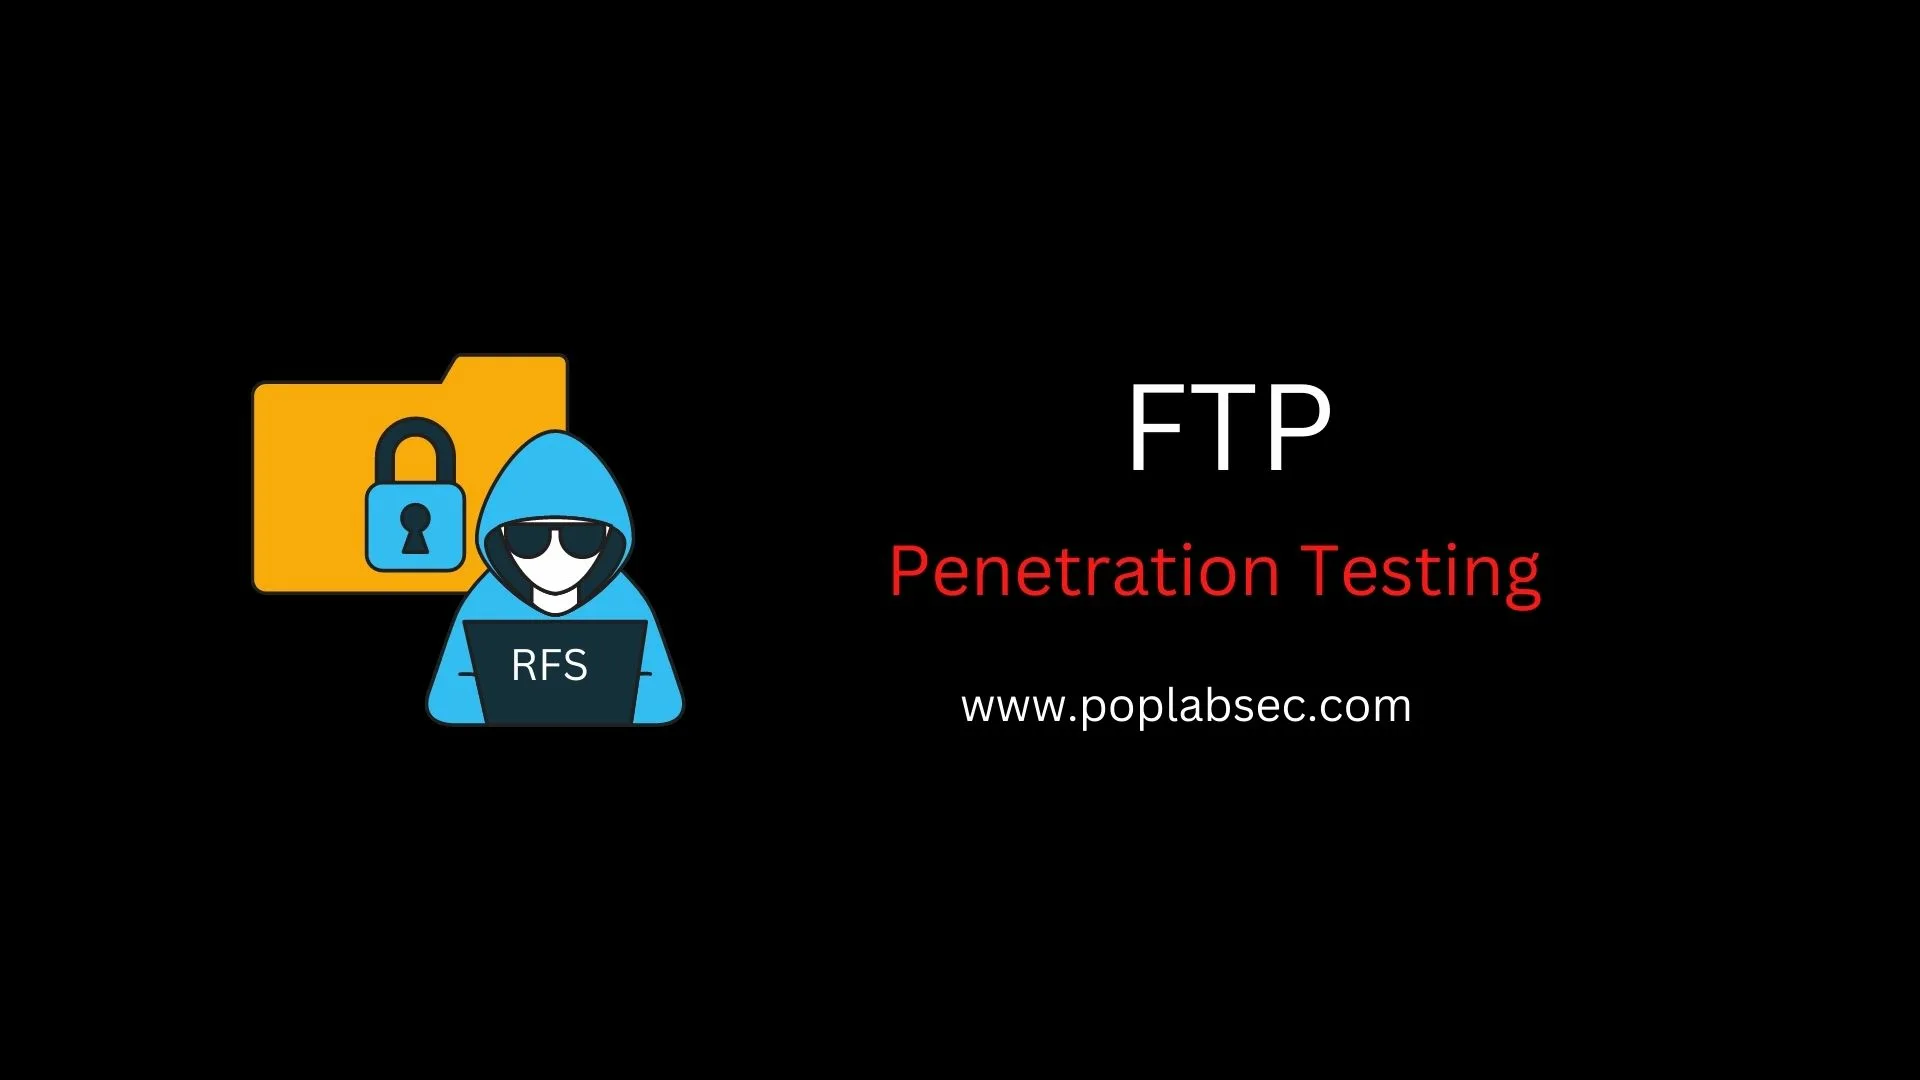 The Ultimate Guide to FTP Penetration Testing